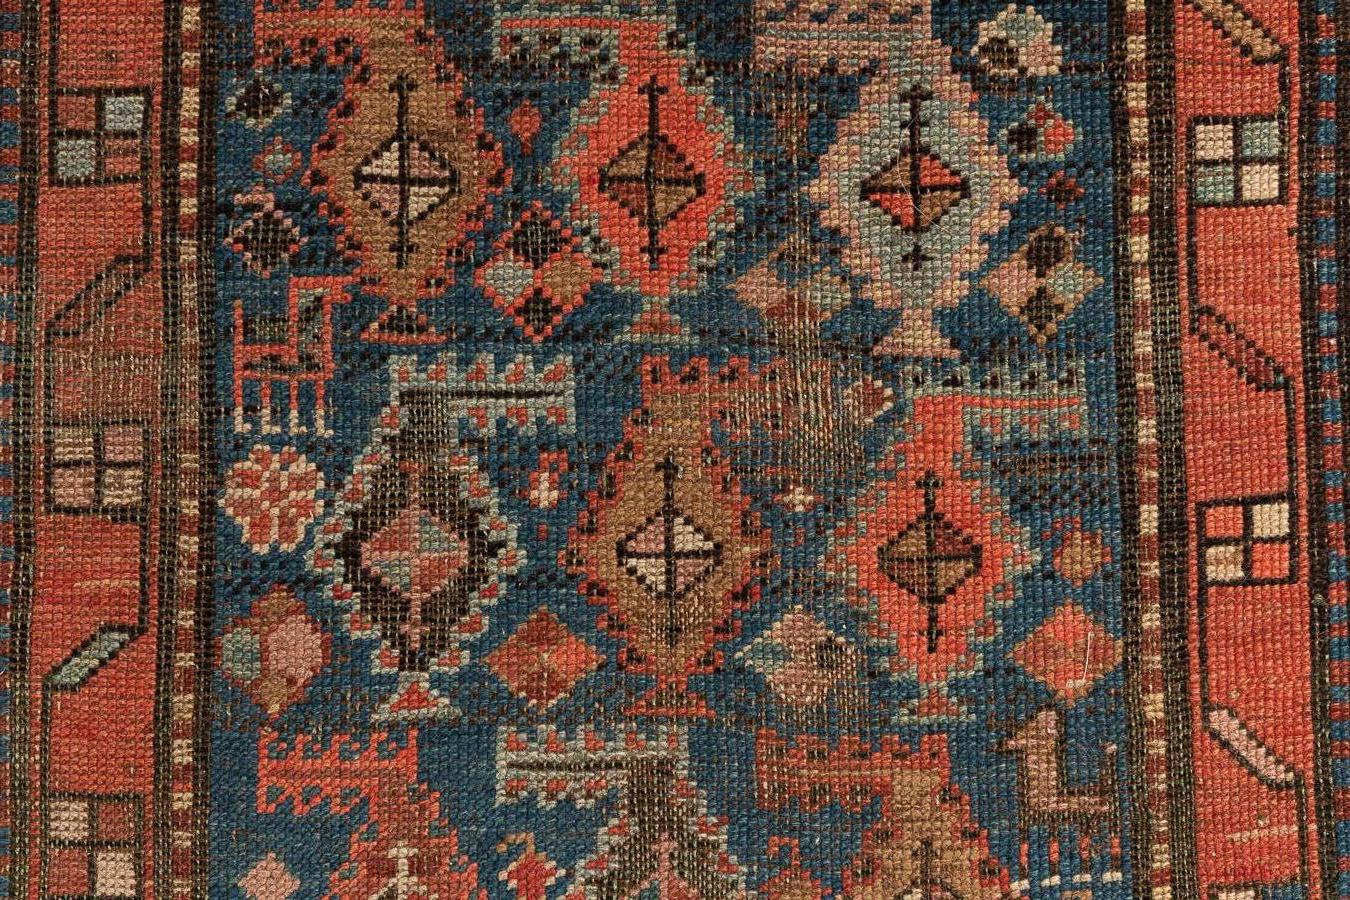 Karabagh - South Caucasus

Caucasian Chan-Karabagh rug from the end of the 19th century, with a predominantly light blue colour. This rug has rows of colourful bothes in its central area suspended by a handle that changes direction between the